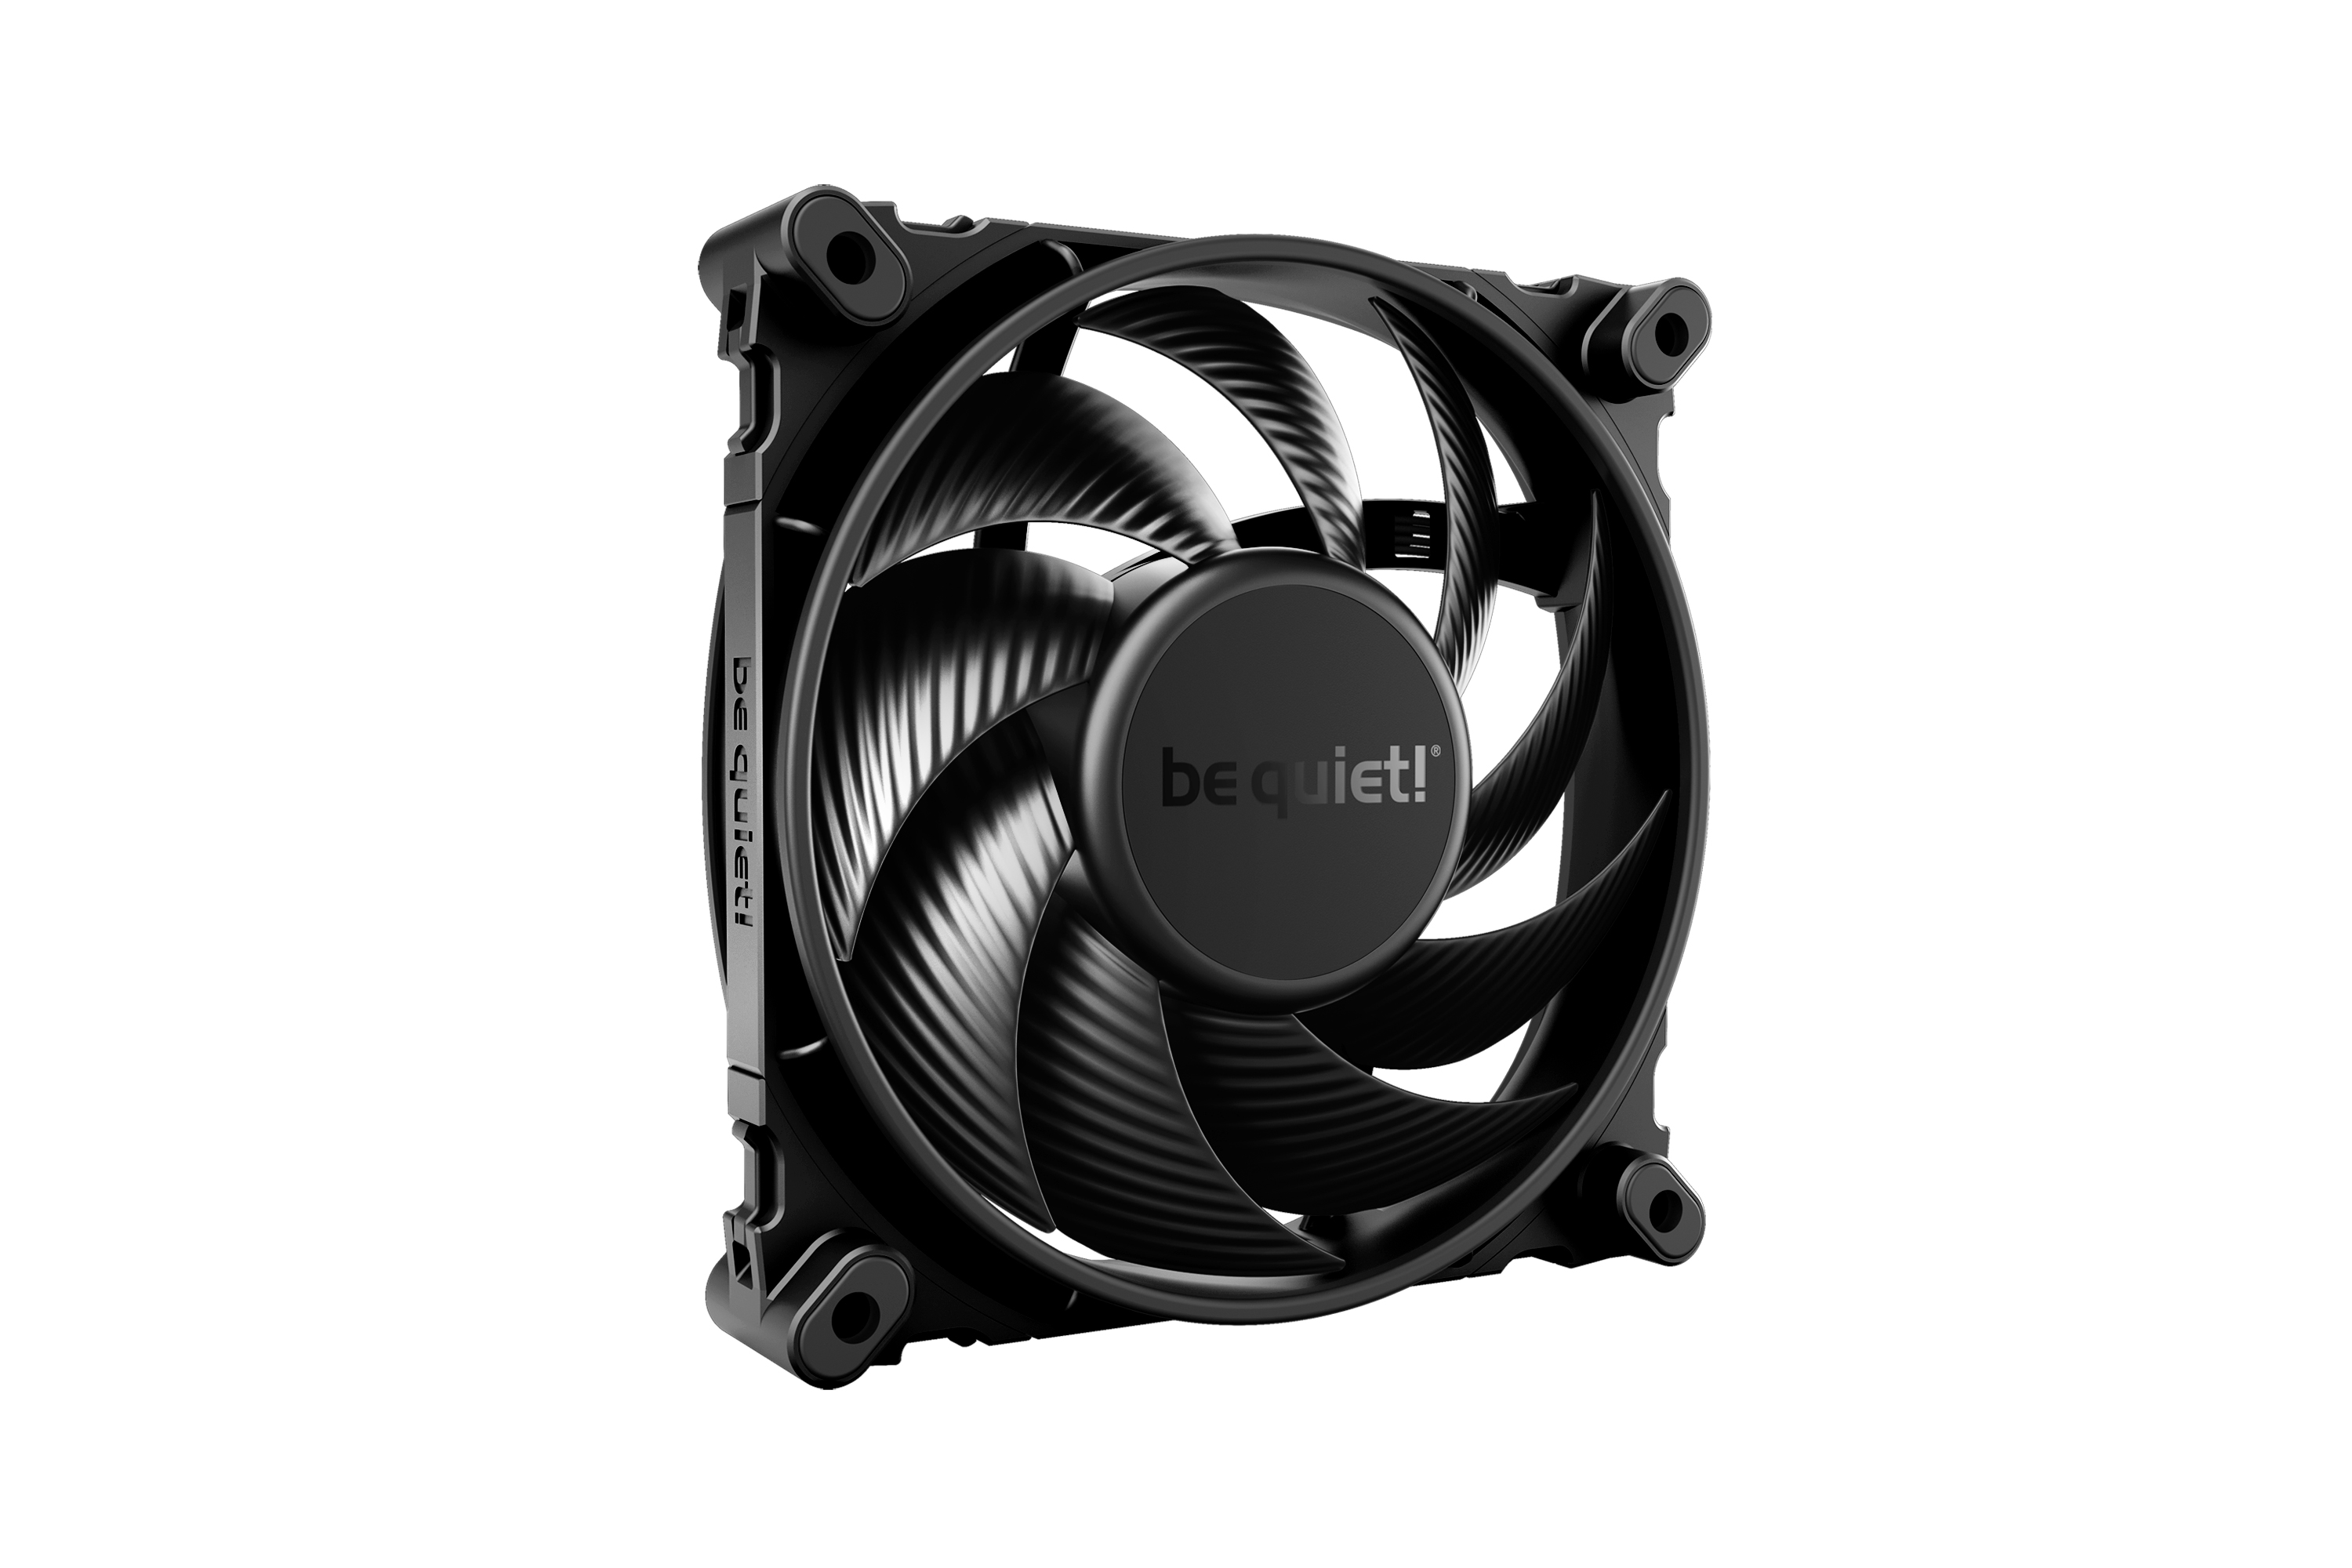 BE QUIET! SILENT WINGS 4 120MM PWMHIGH SPEED CASING FAN - BL094